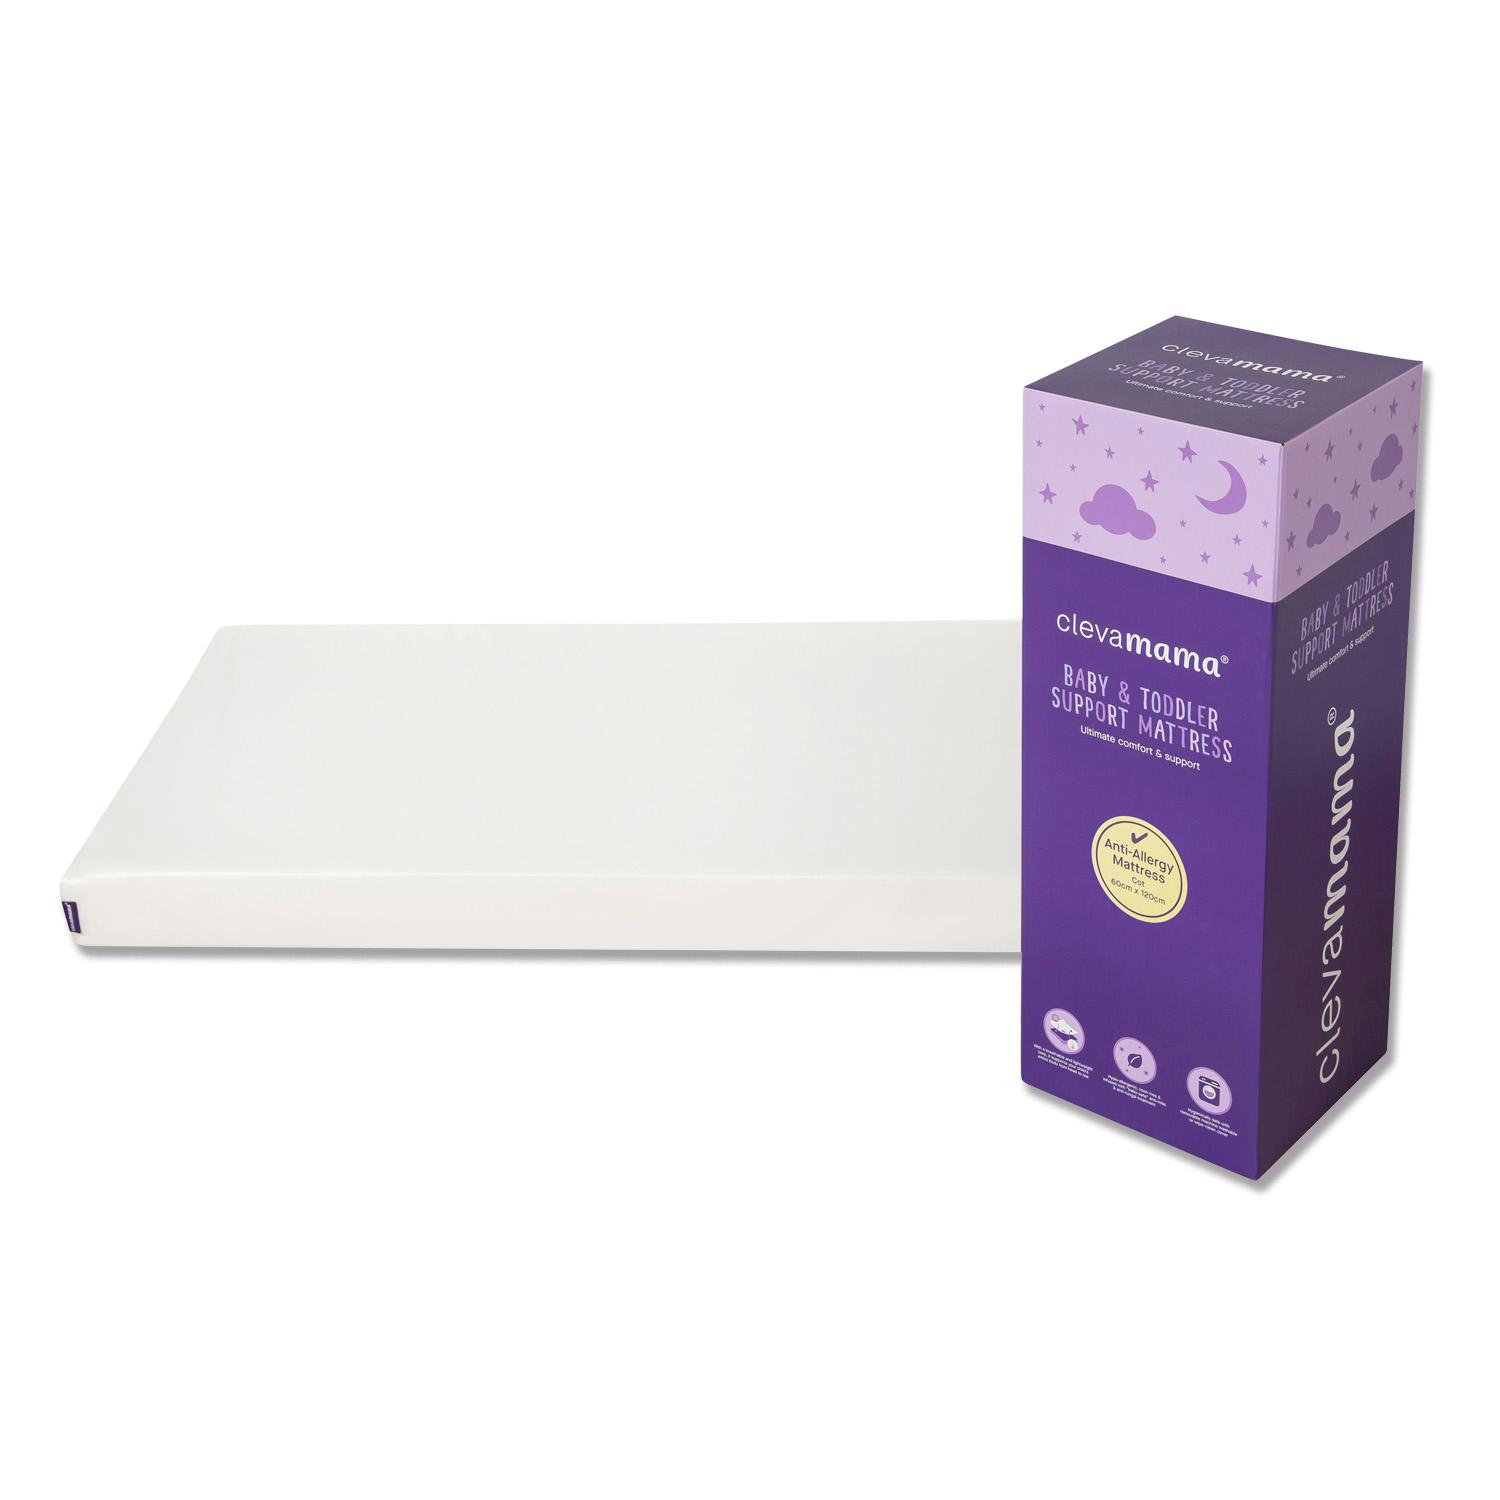 baby-fair Clevamama Anti-Allergy Cot Size Mattress (Various Sizes Available)